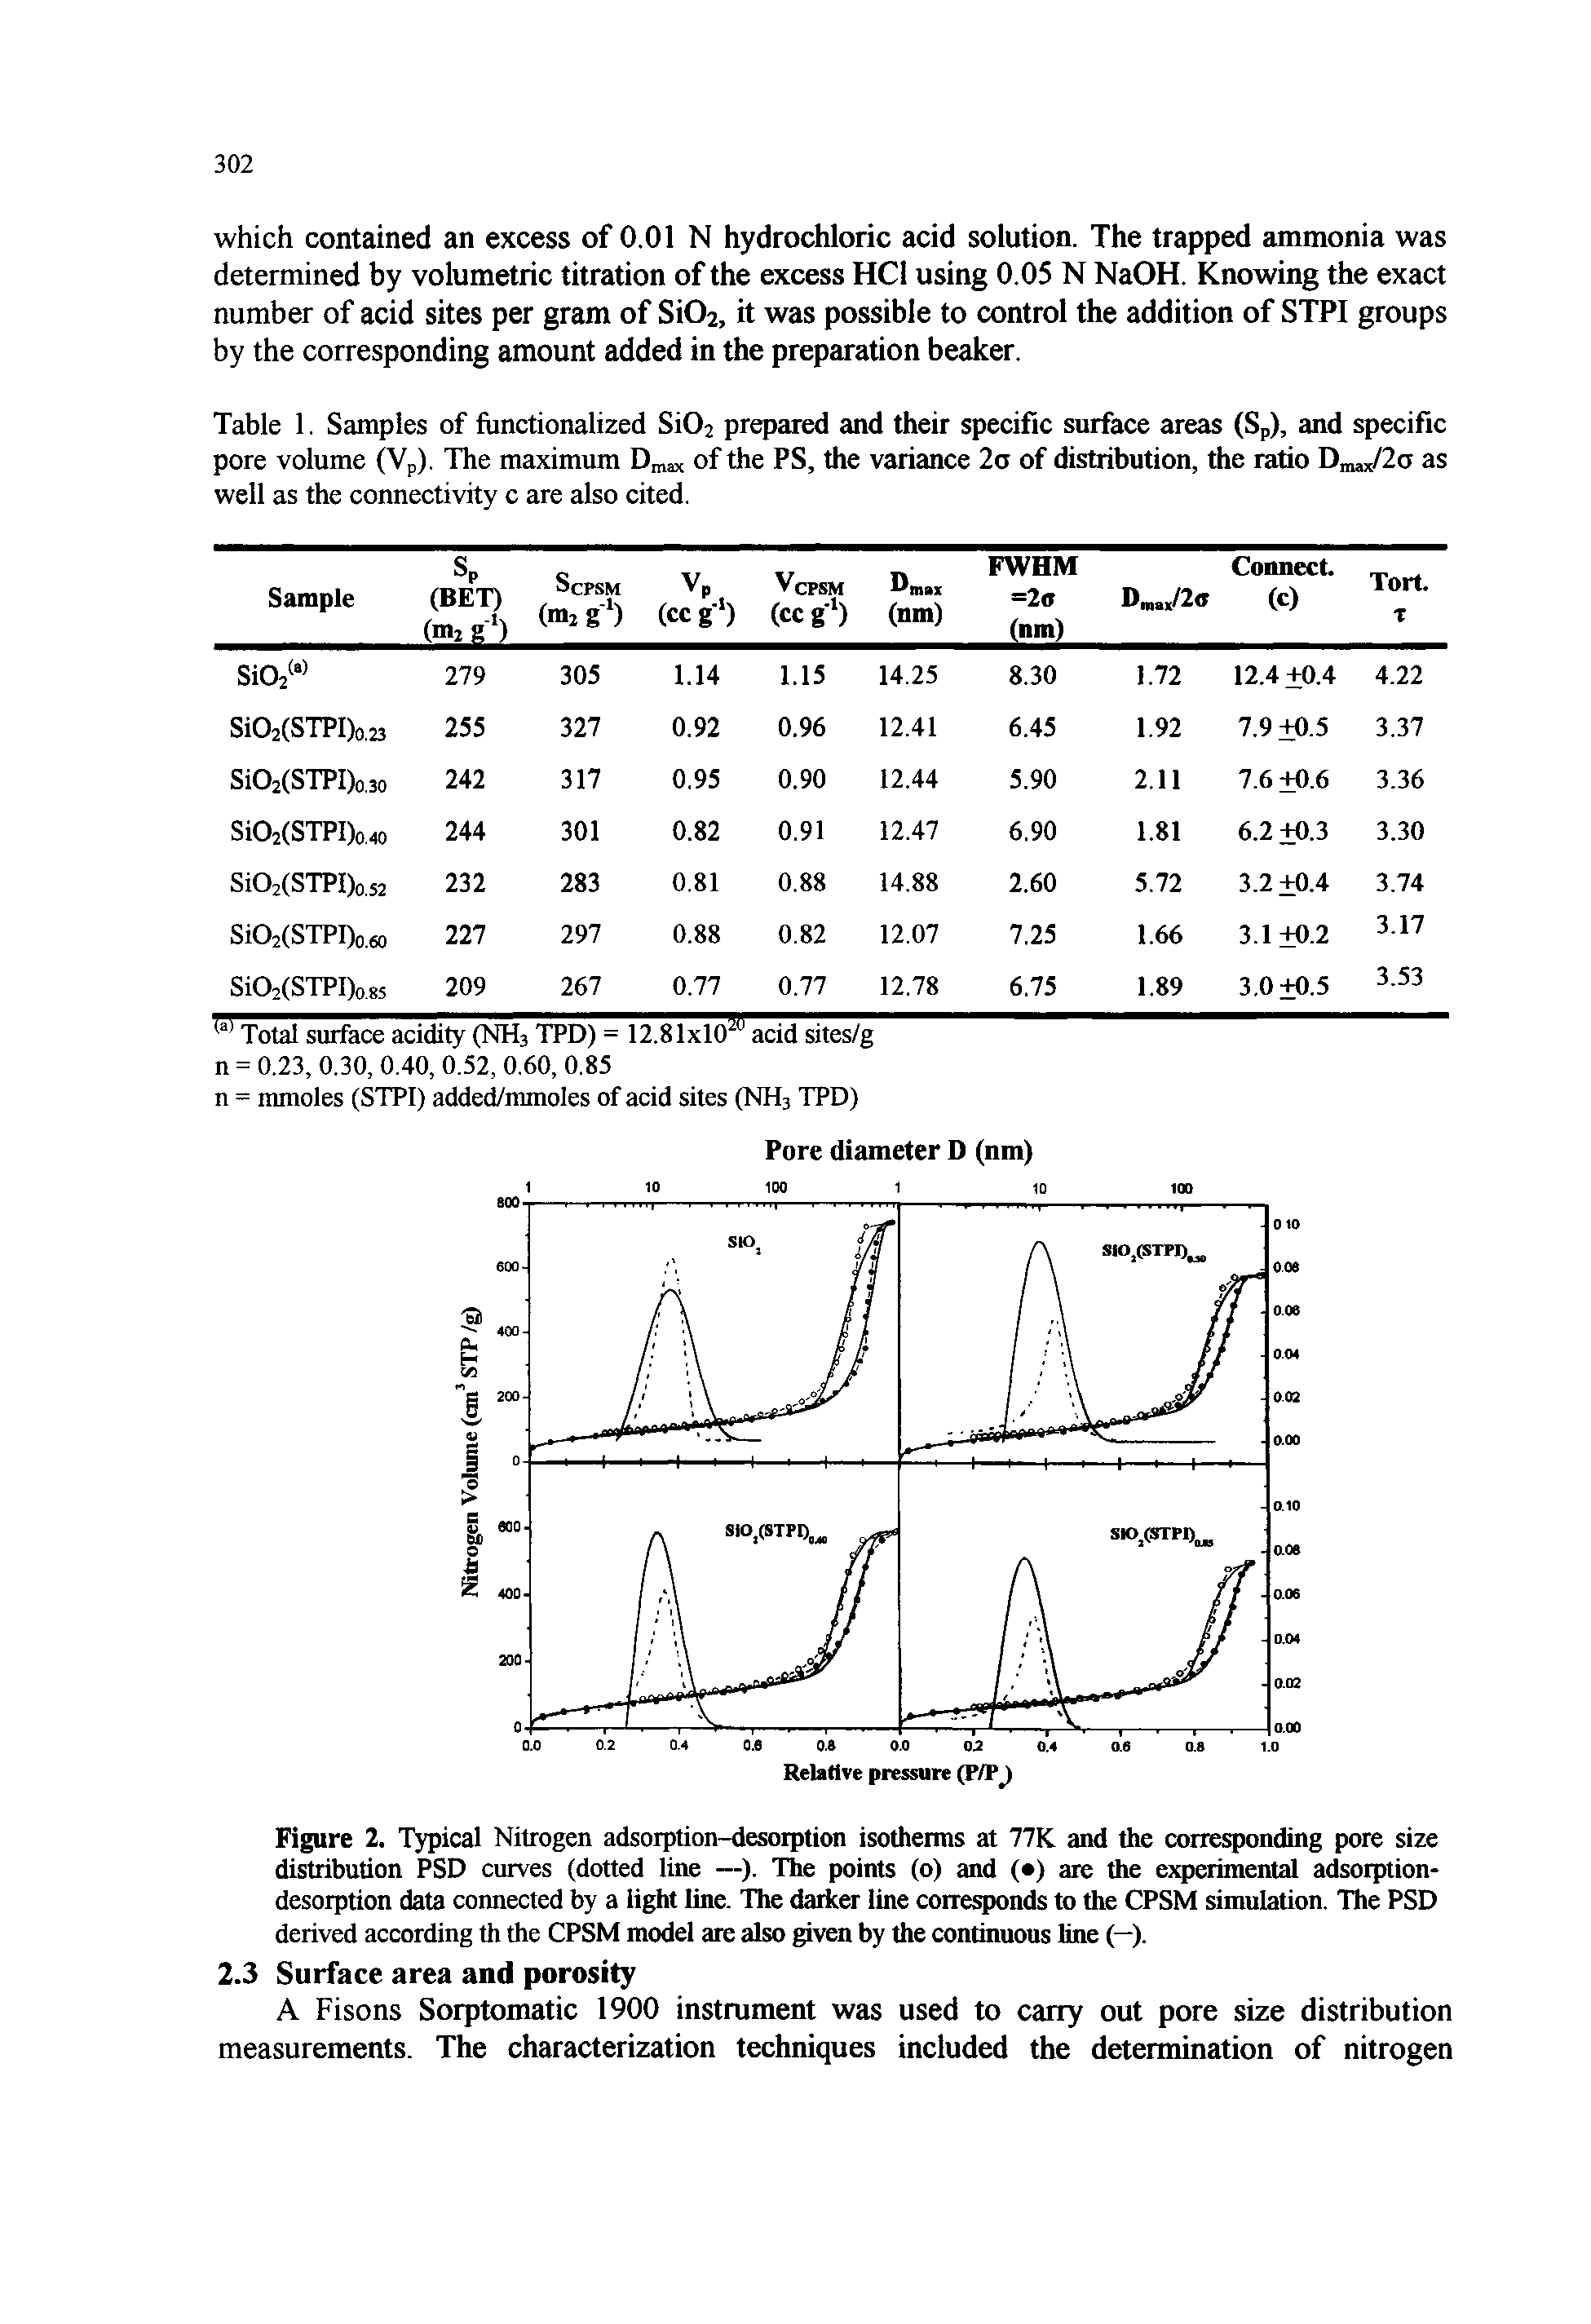 Figure 2. Typical Nitrogen adsorption-desorption isotherms at 77K and the corresponding pore size distribution PSD curves (dotted line —). The points (o) and ( ) are the experimental adsorption-desorption data connected by a light line. The darker line corresponds to the CPSM simulation. The PSD derived according th the CPSM model are also given by the continuous line (—).